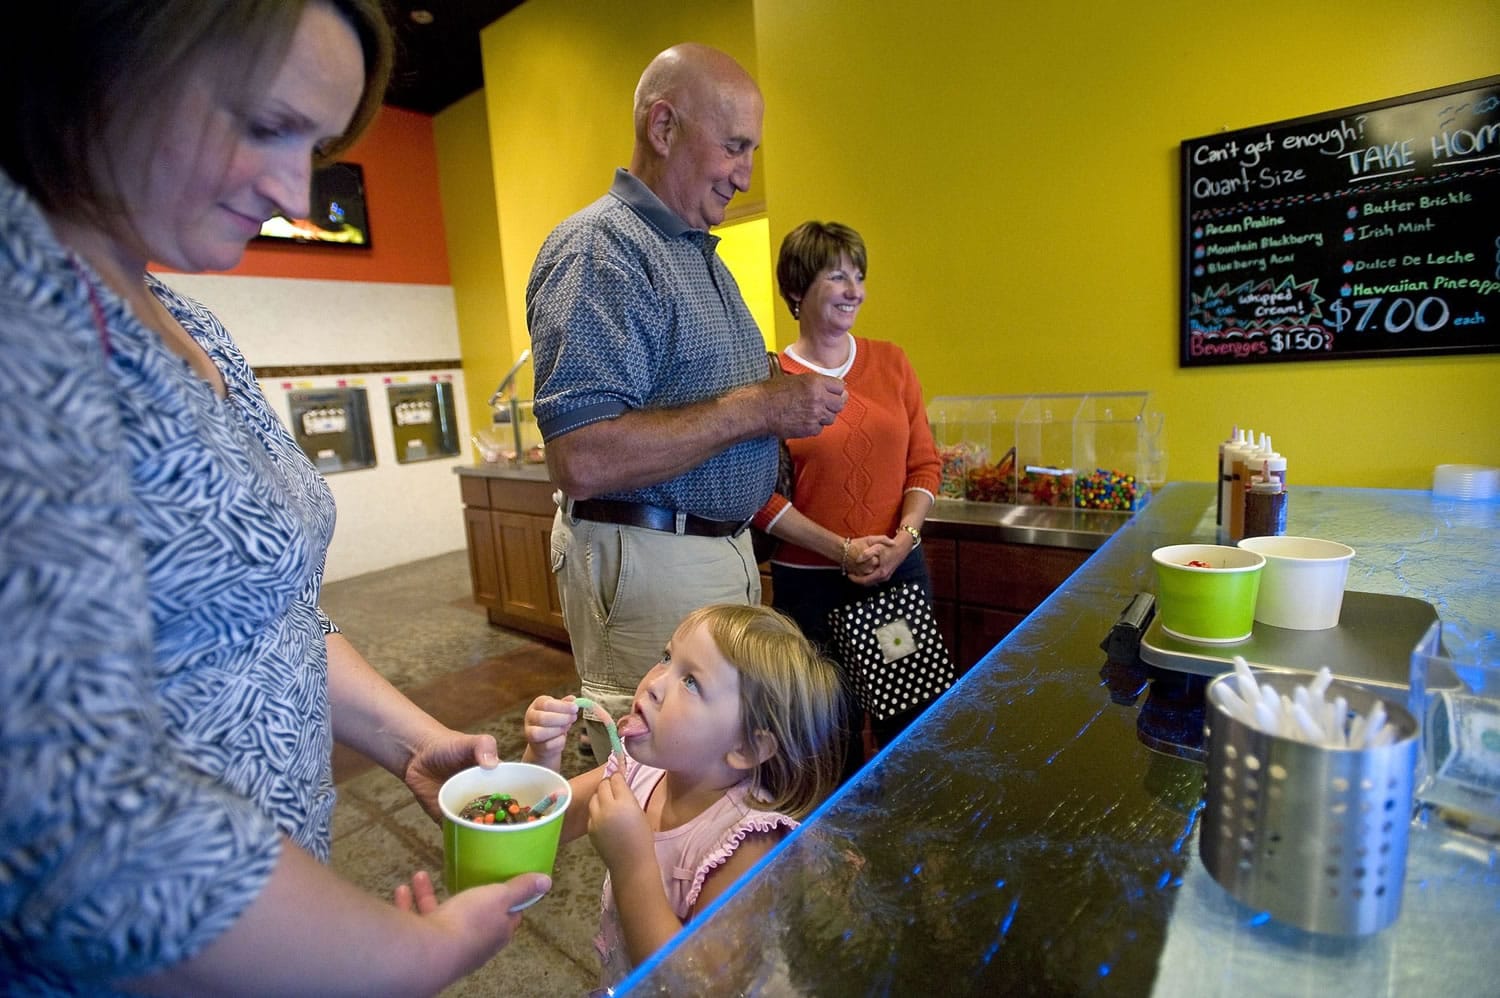 Natalie Shumaker, 4, tastes a gummy worm while her mother, Katy Shumaker, holds her cup of frozen yogurt and grandparents Tom and Liz Shumaker pay in the background at Yo 2 Go frozen yogurt shop Wednesday in Vancouver.